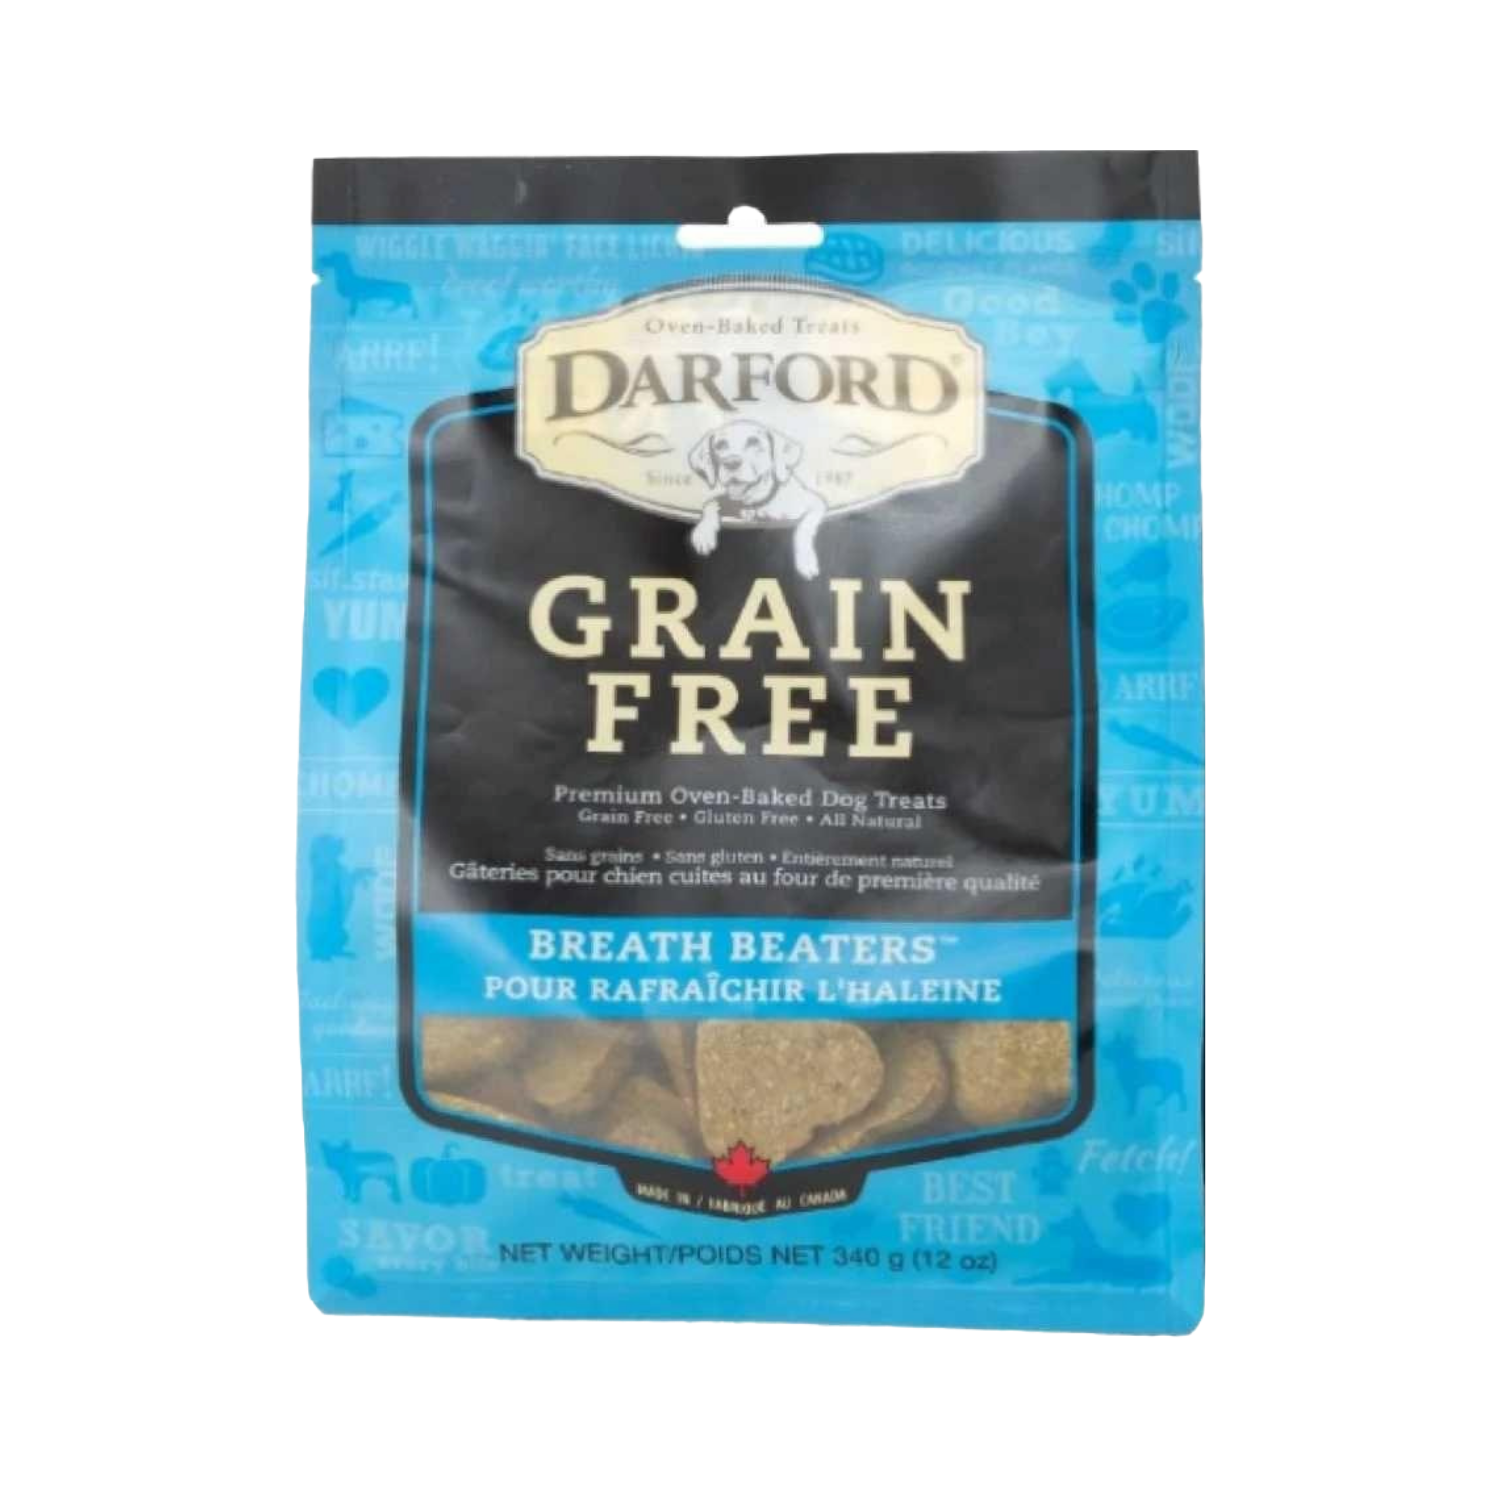 [DISCONTINUED] Darford Grain Free (Breath Beater) for Dogs - 340g